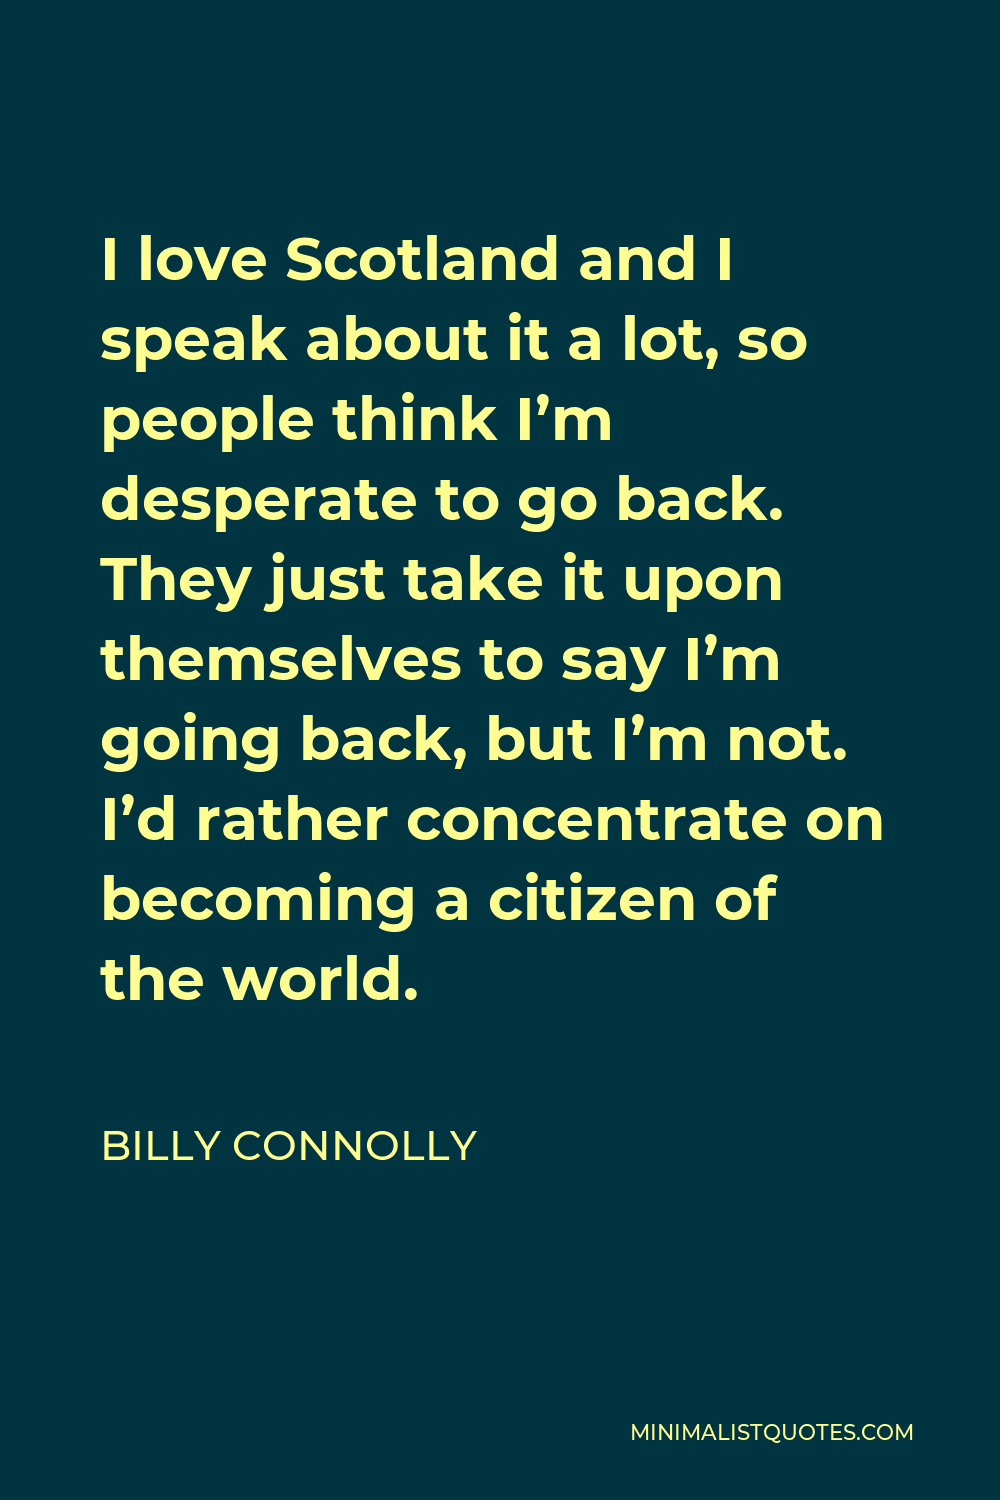 Billy Connolly Quote - I love Scotland and I speak about it a lot, so people think I’m desperate to go back. They just take it upon themselves to say I’m going back, but I’m not. I’d rather concentrate on becoming a citizen of the world.